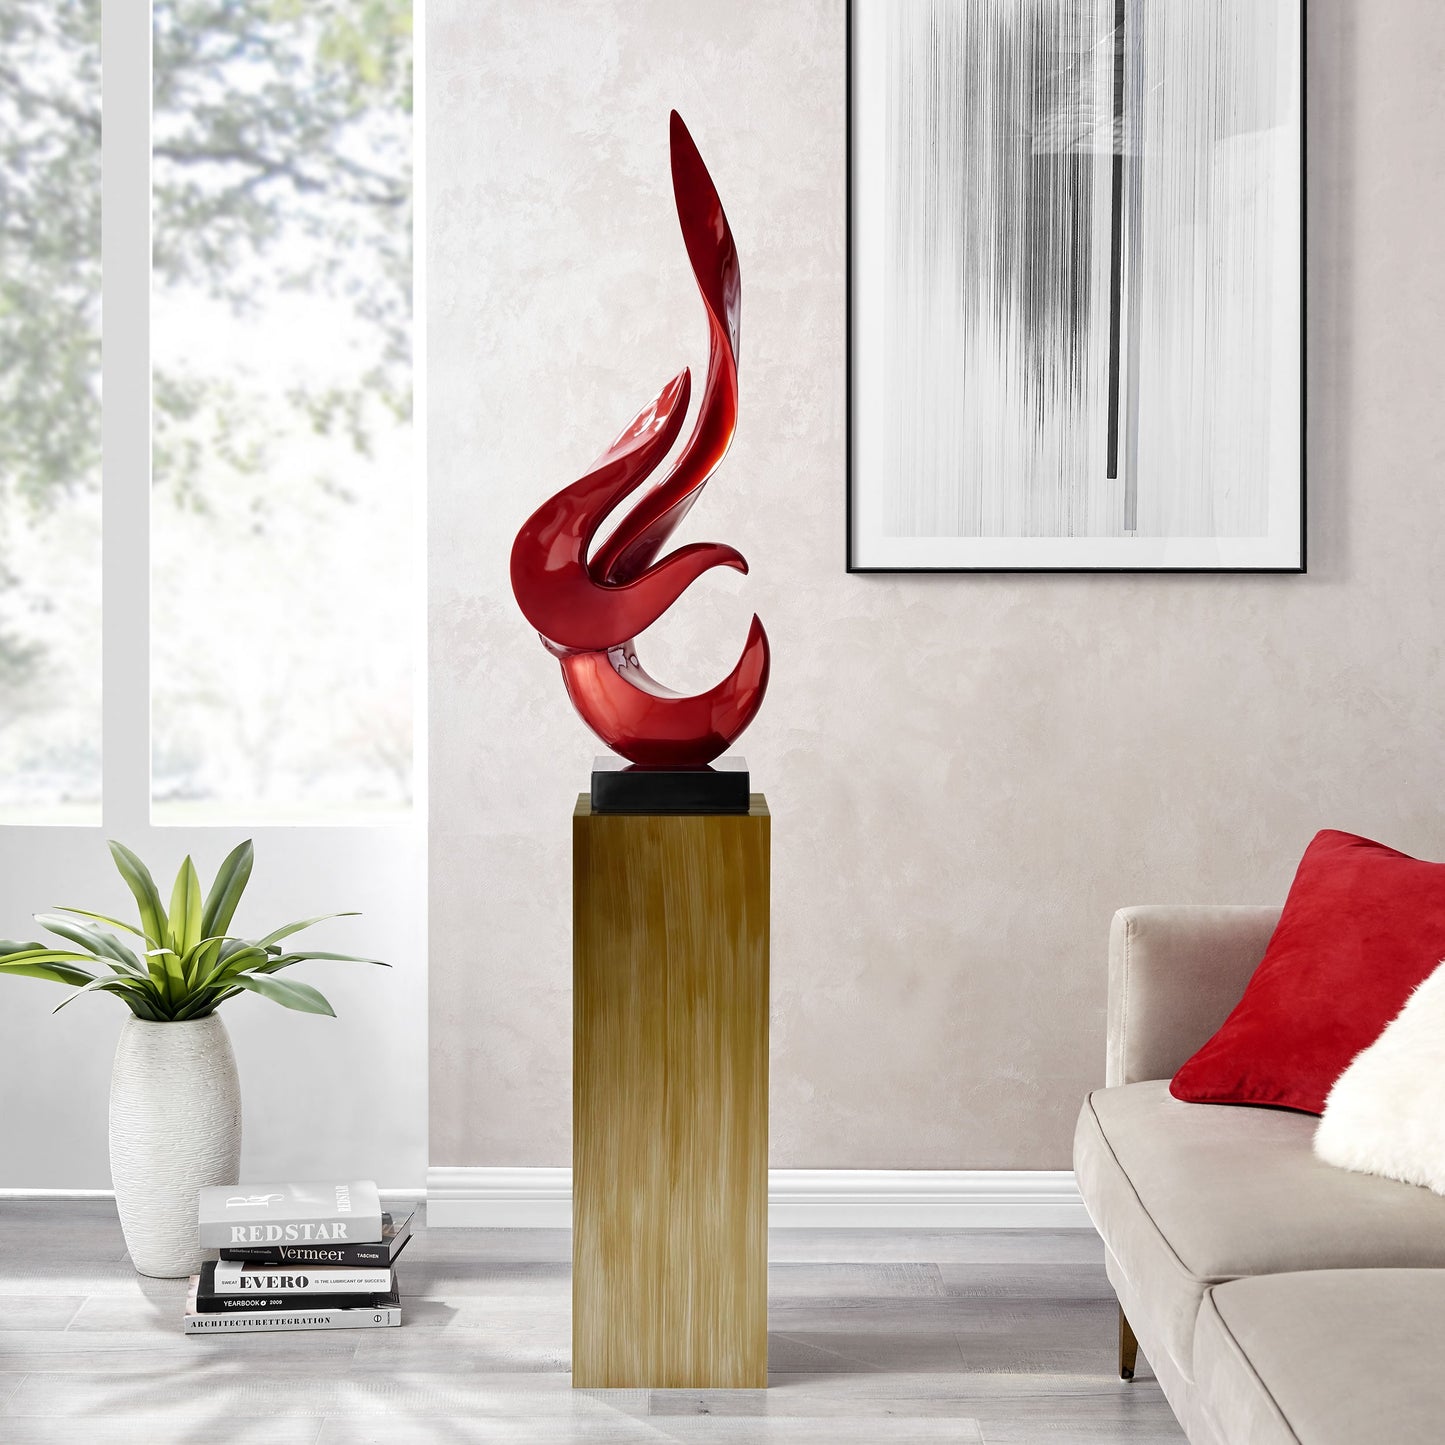 Metallic Red Flame Floor Sculpture With Bronze Stand, 65" Tall